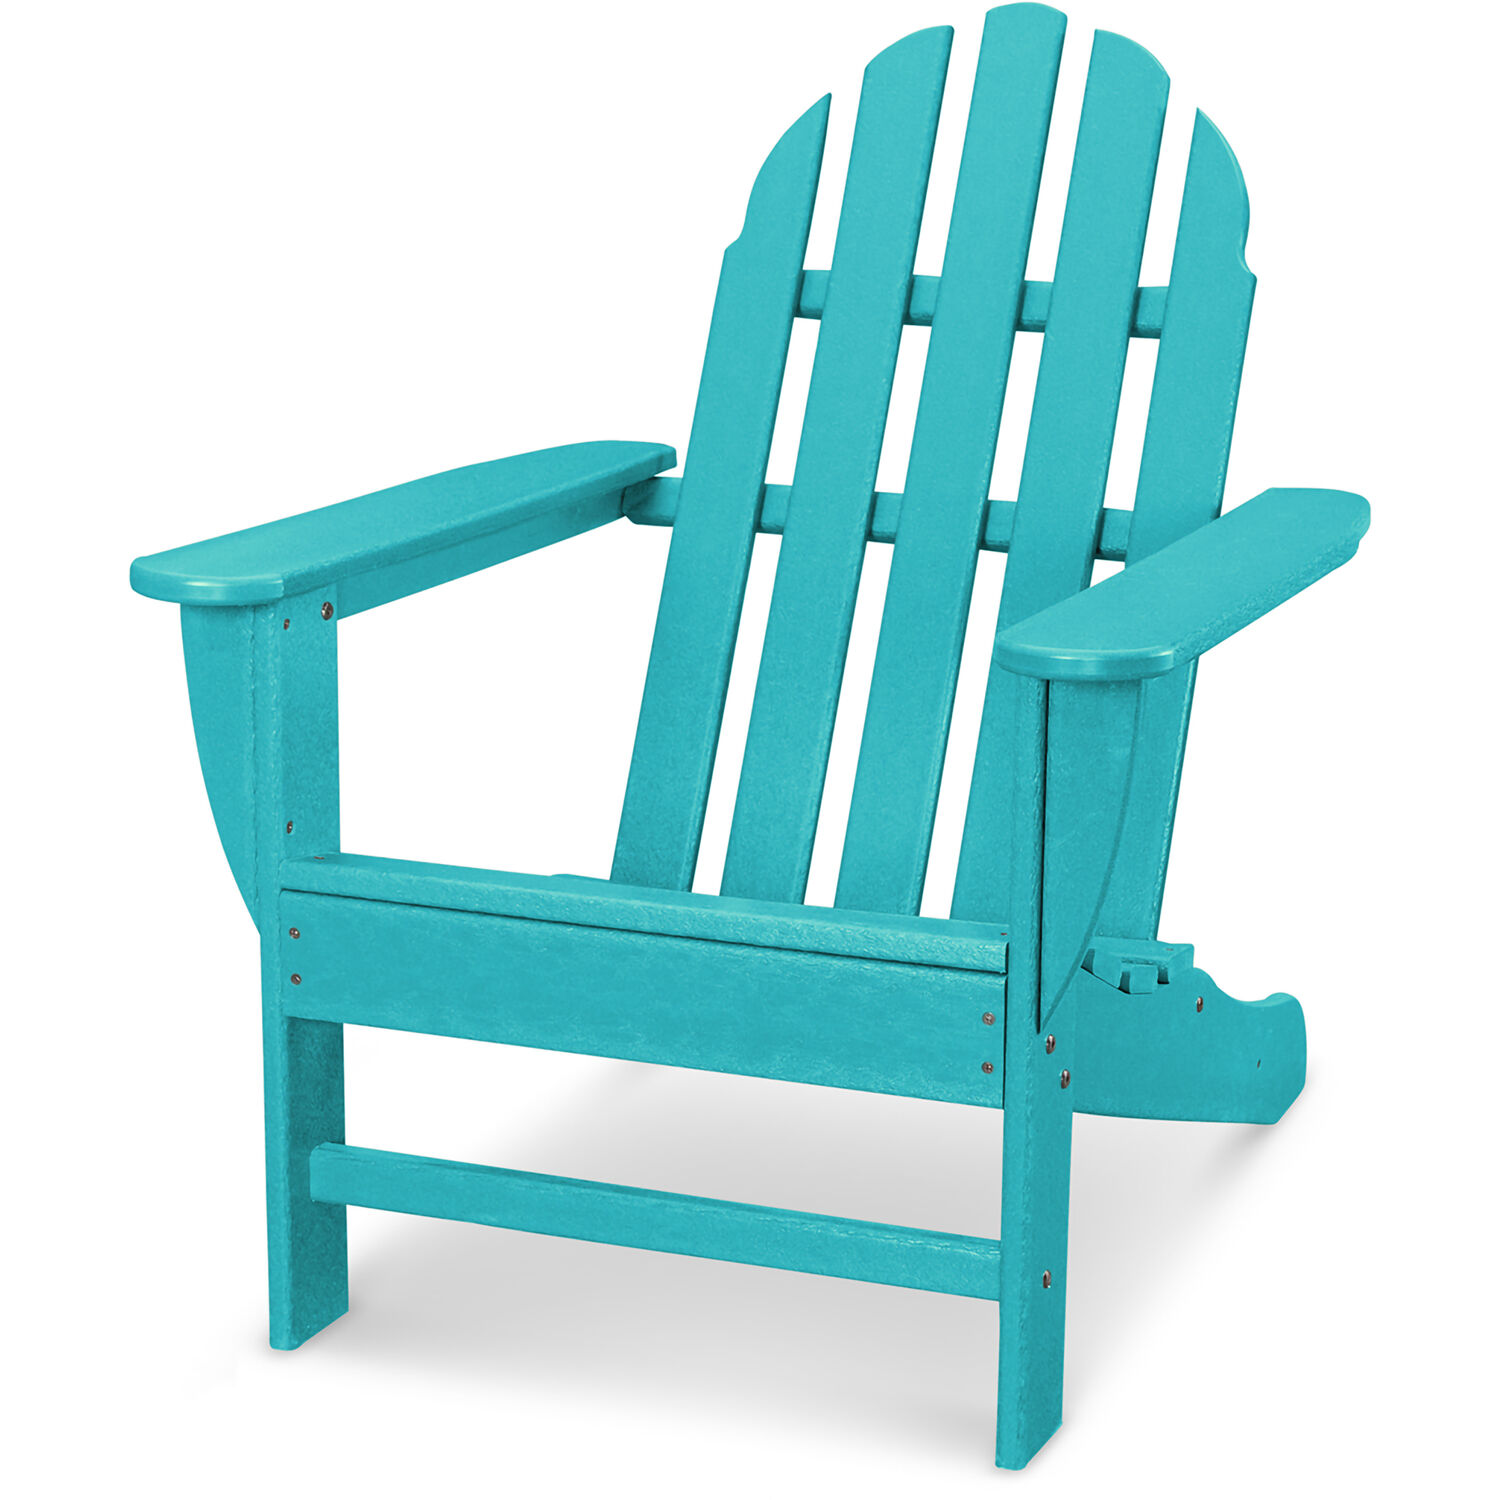 Hanover Classic All-Weather Adirondack Chair in Aruba Blue - image 2 of 2